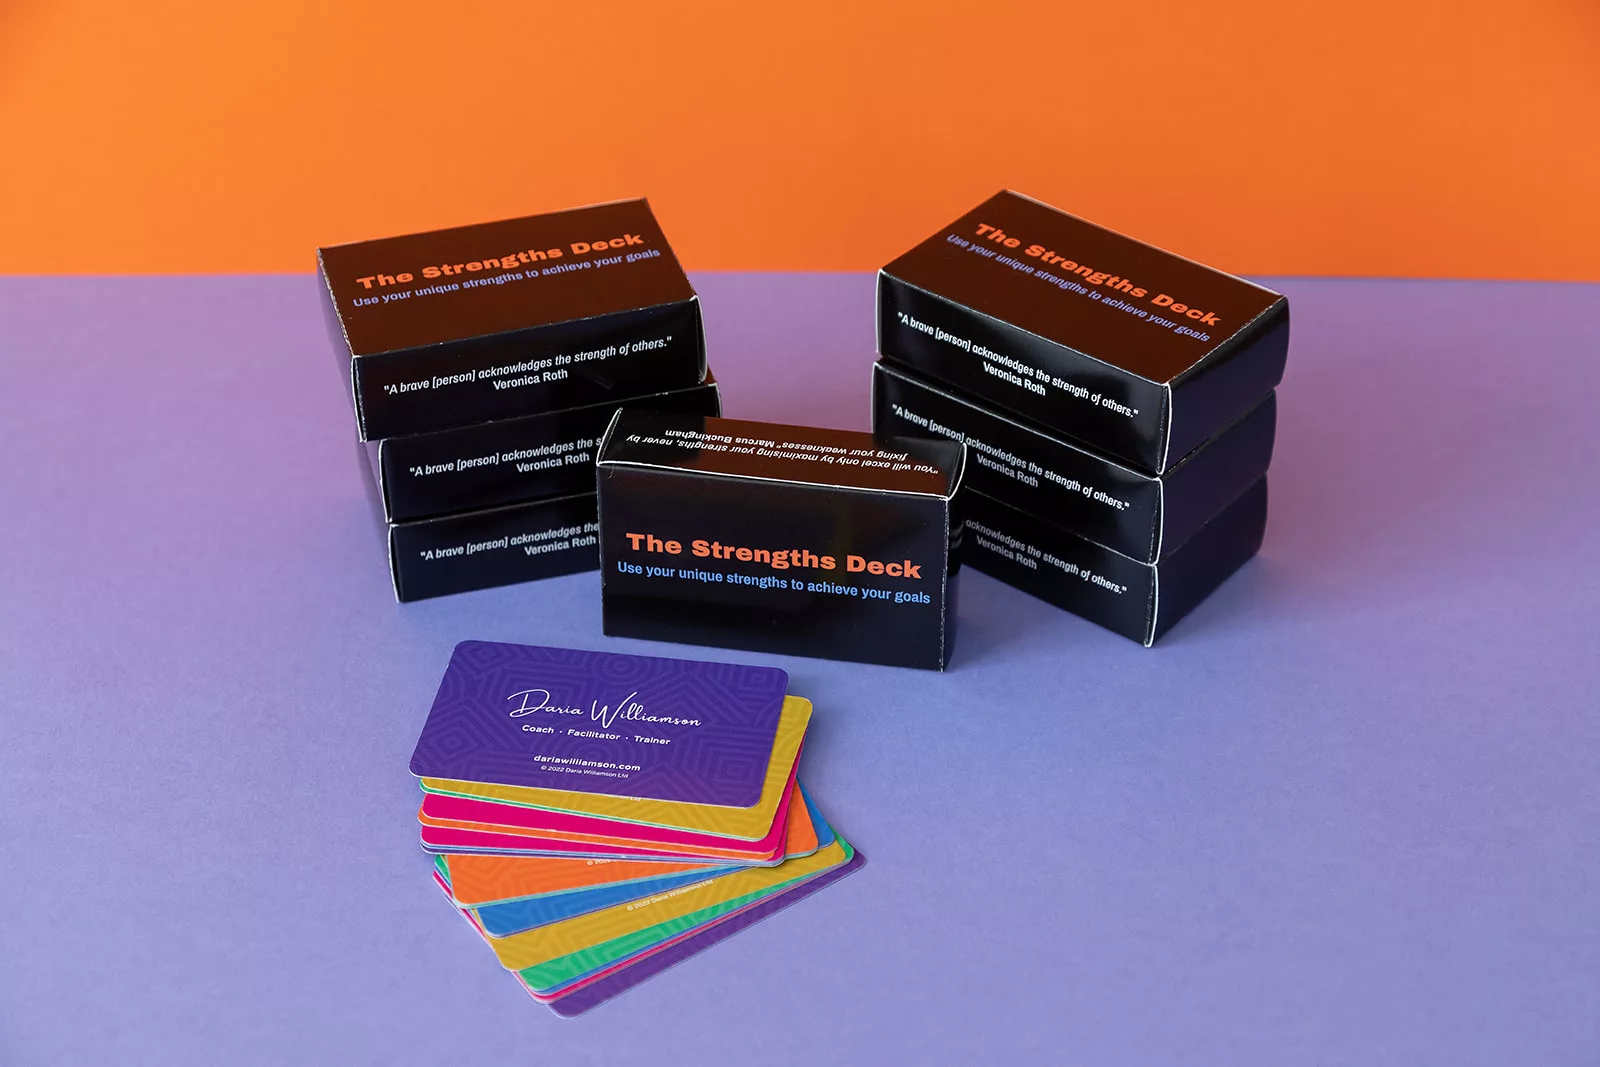 A stack of black boxes with "The Strengths Deck" logo on them are stacked on a purple surface, with an orange background. In front of the stacks of card boxes, a handful of brightly-coloured cards are fanned out, showing the Daria Williamson logo.